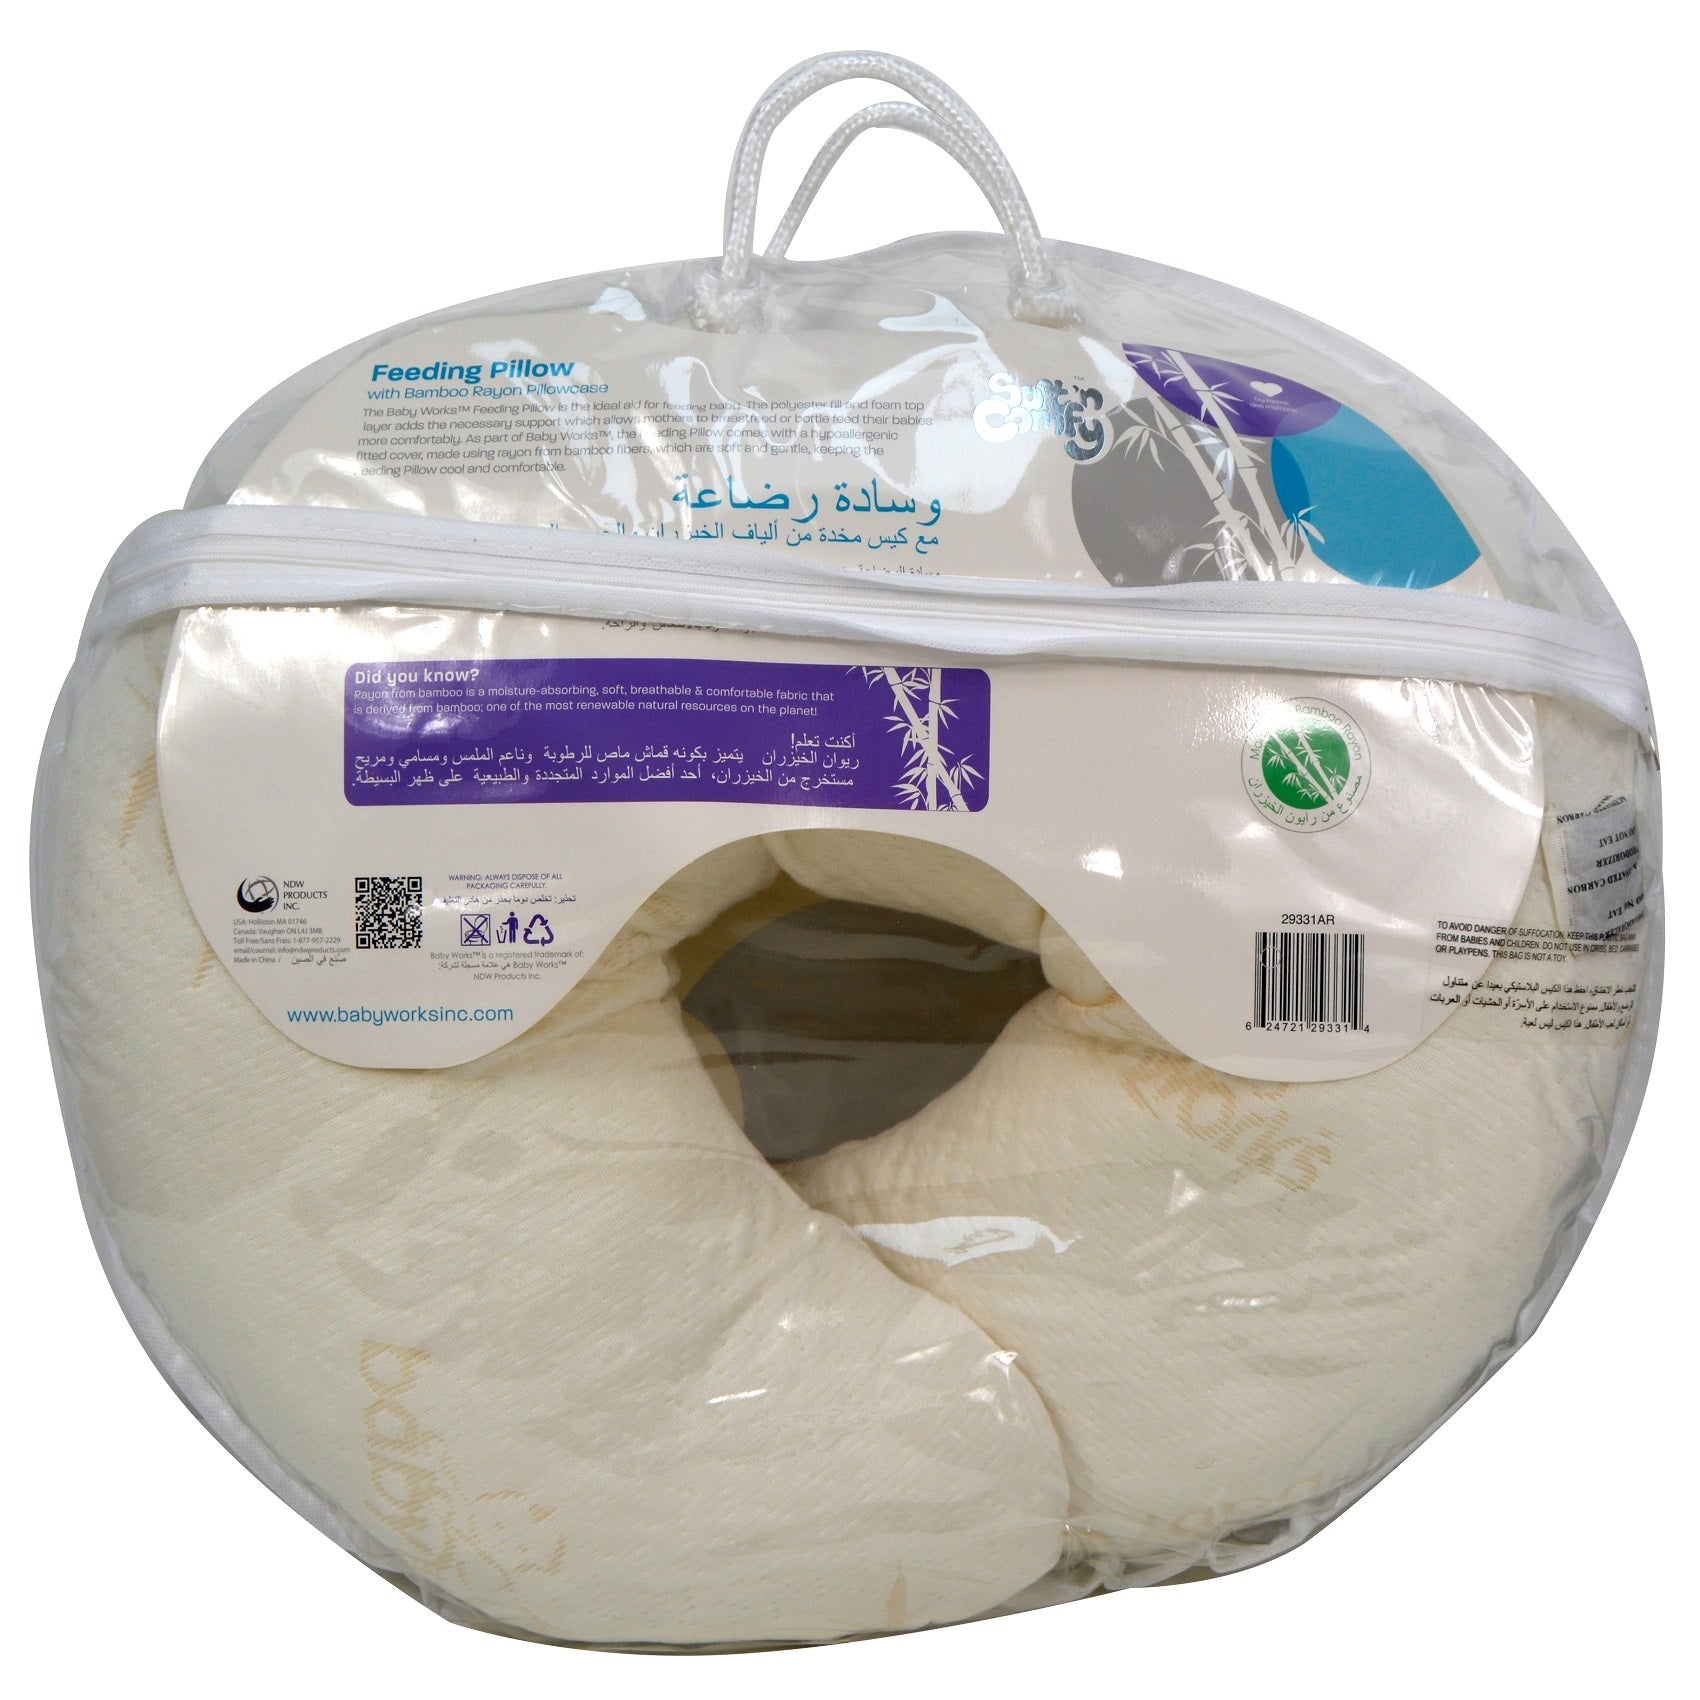 Baby Works - Feeding Pillow With Memory Foam Top & Bottom Layer & Bamboo Pillowcase (White)